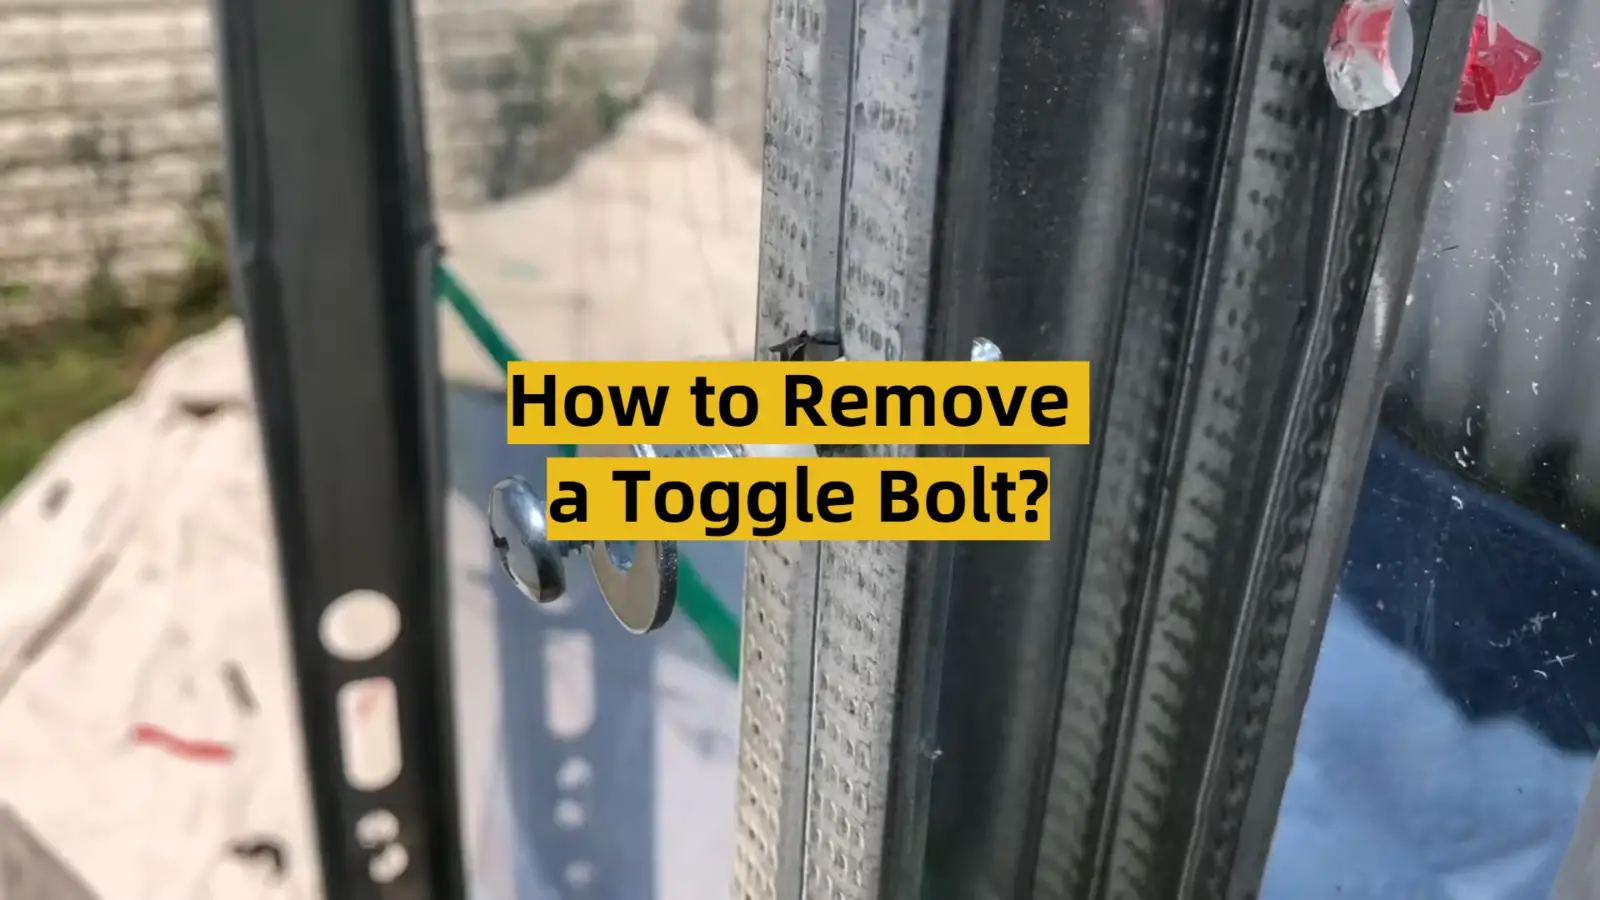 How to Remove a Toggle Bolt?